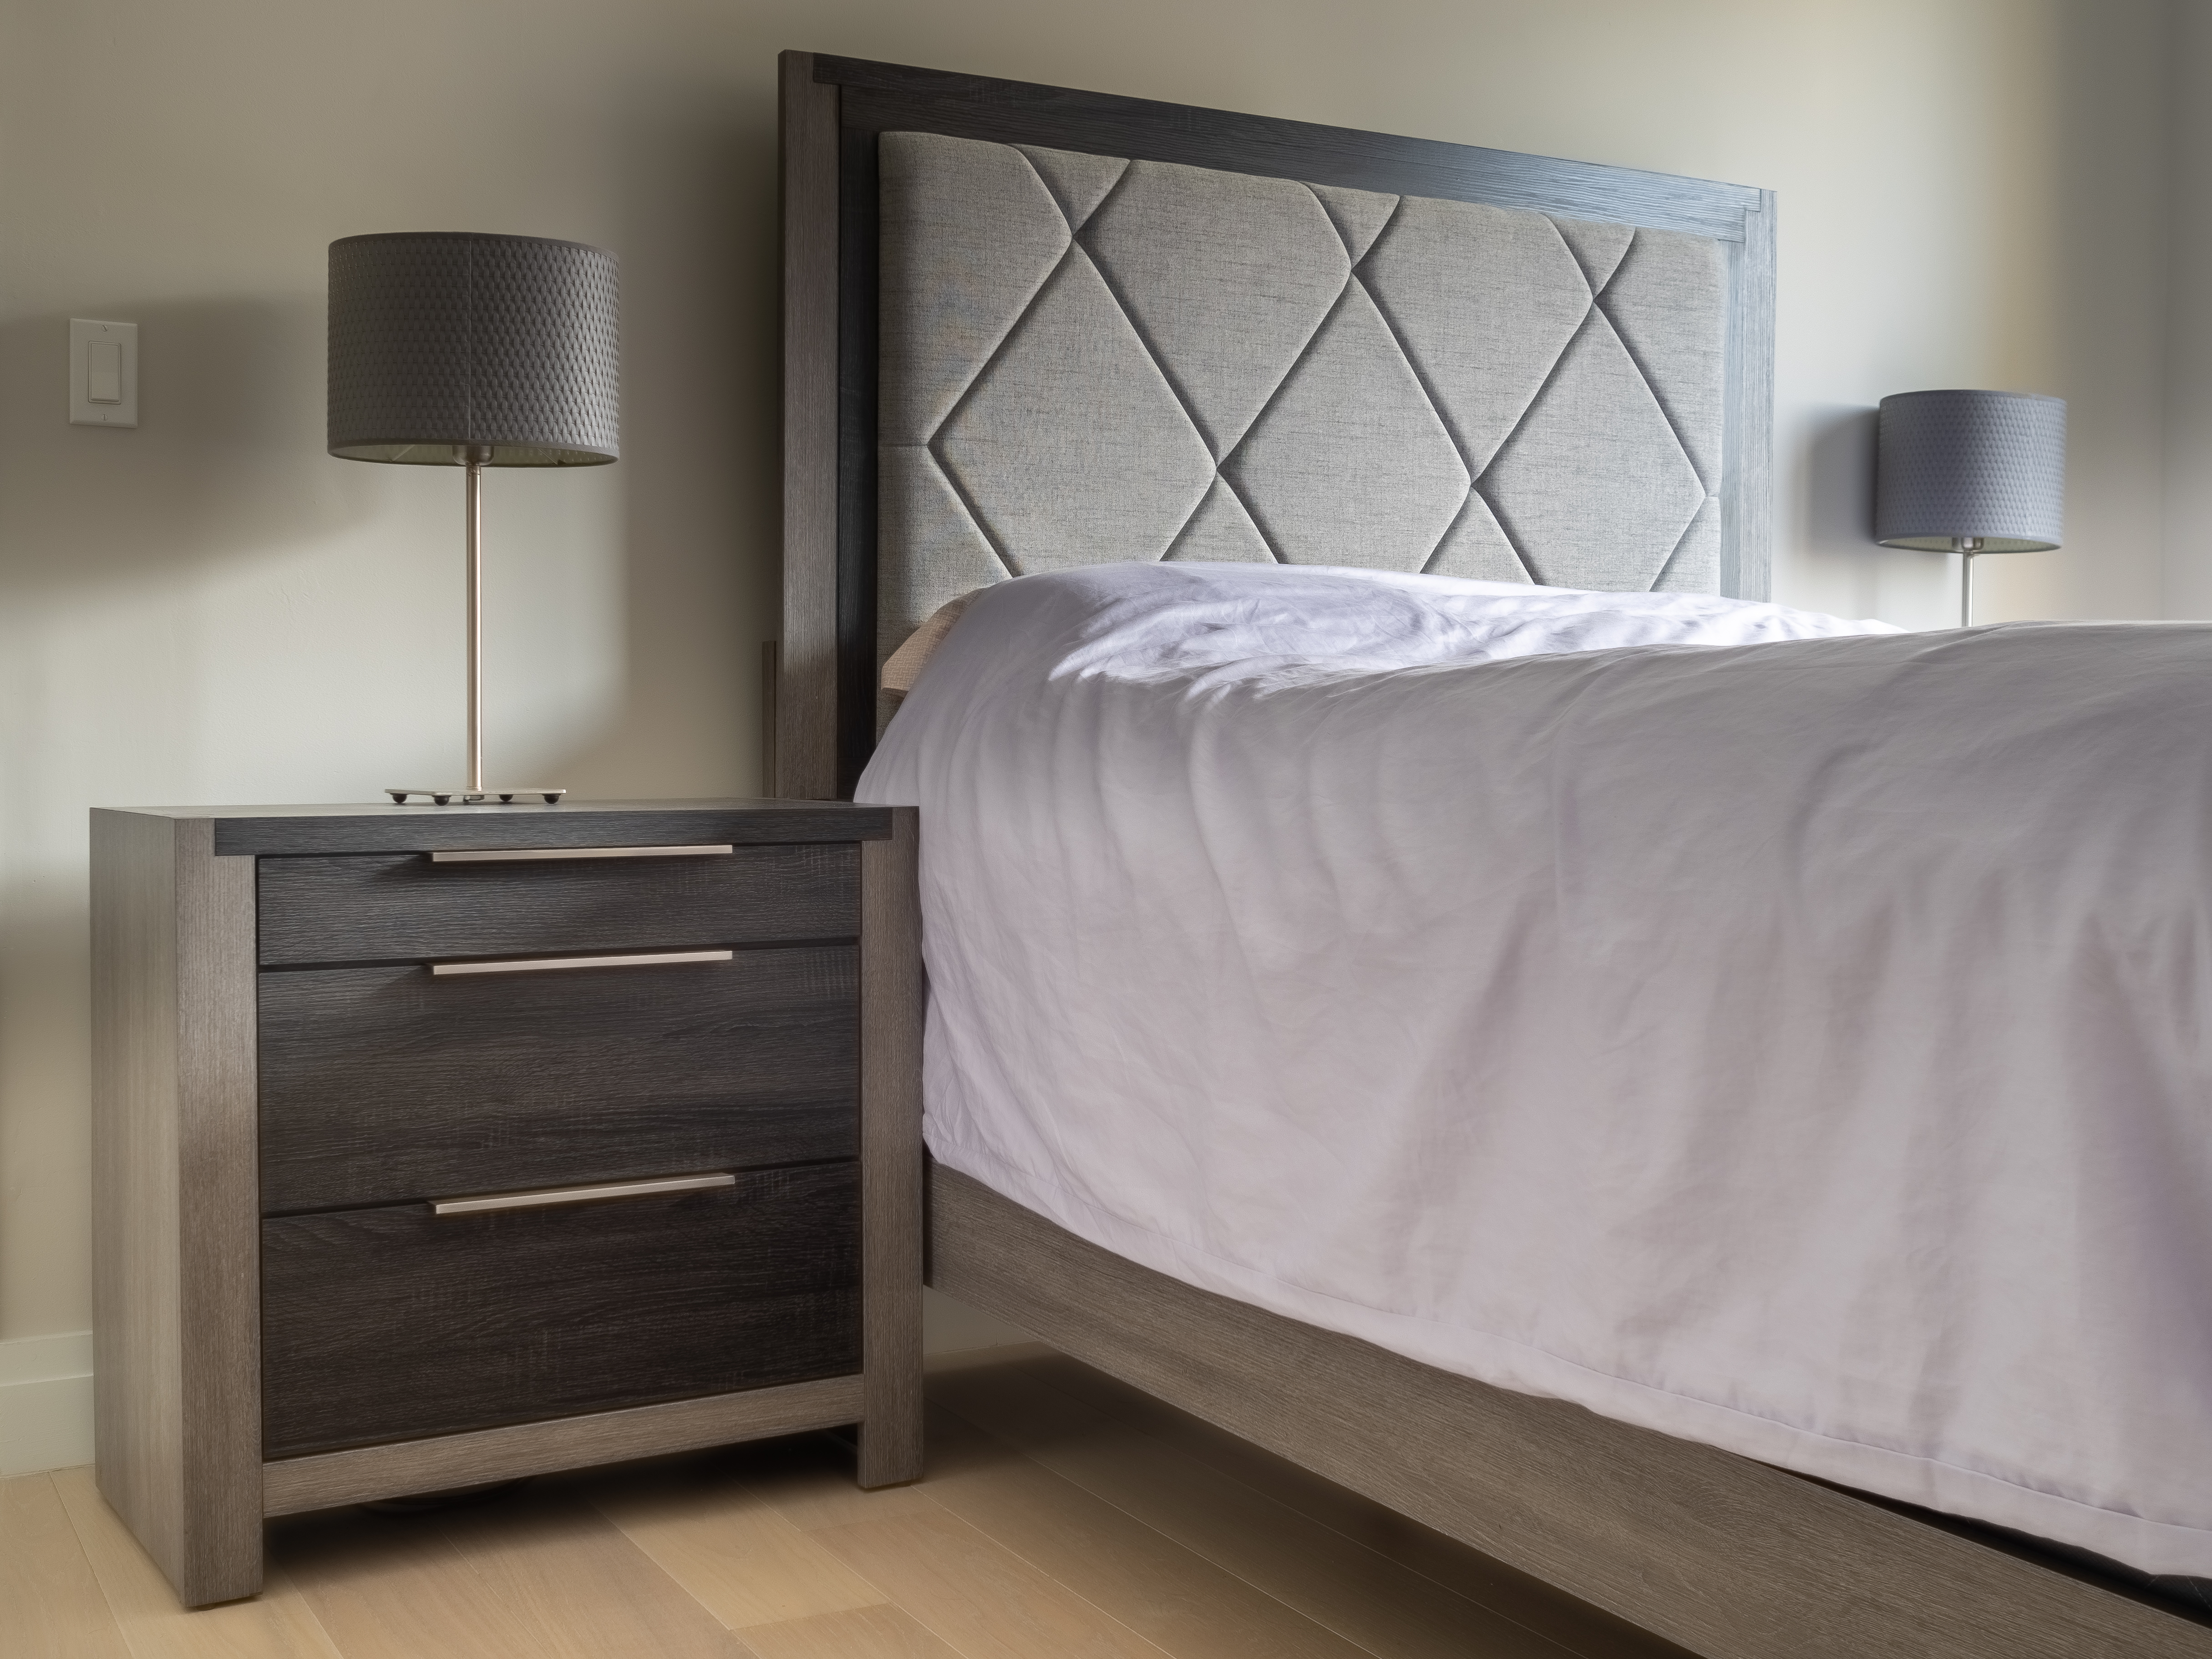 How to Balance a Bedroom With Only One Night Stand?